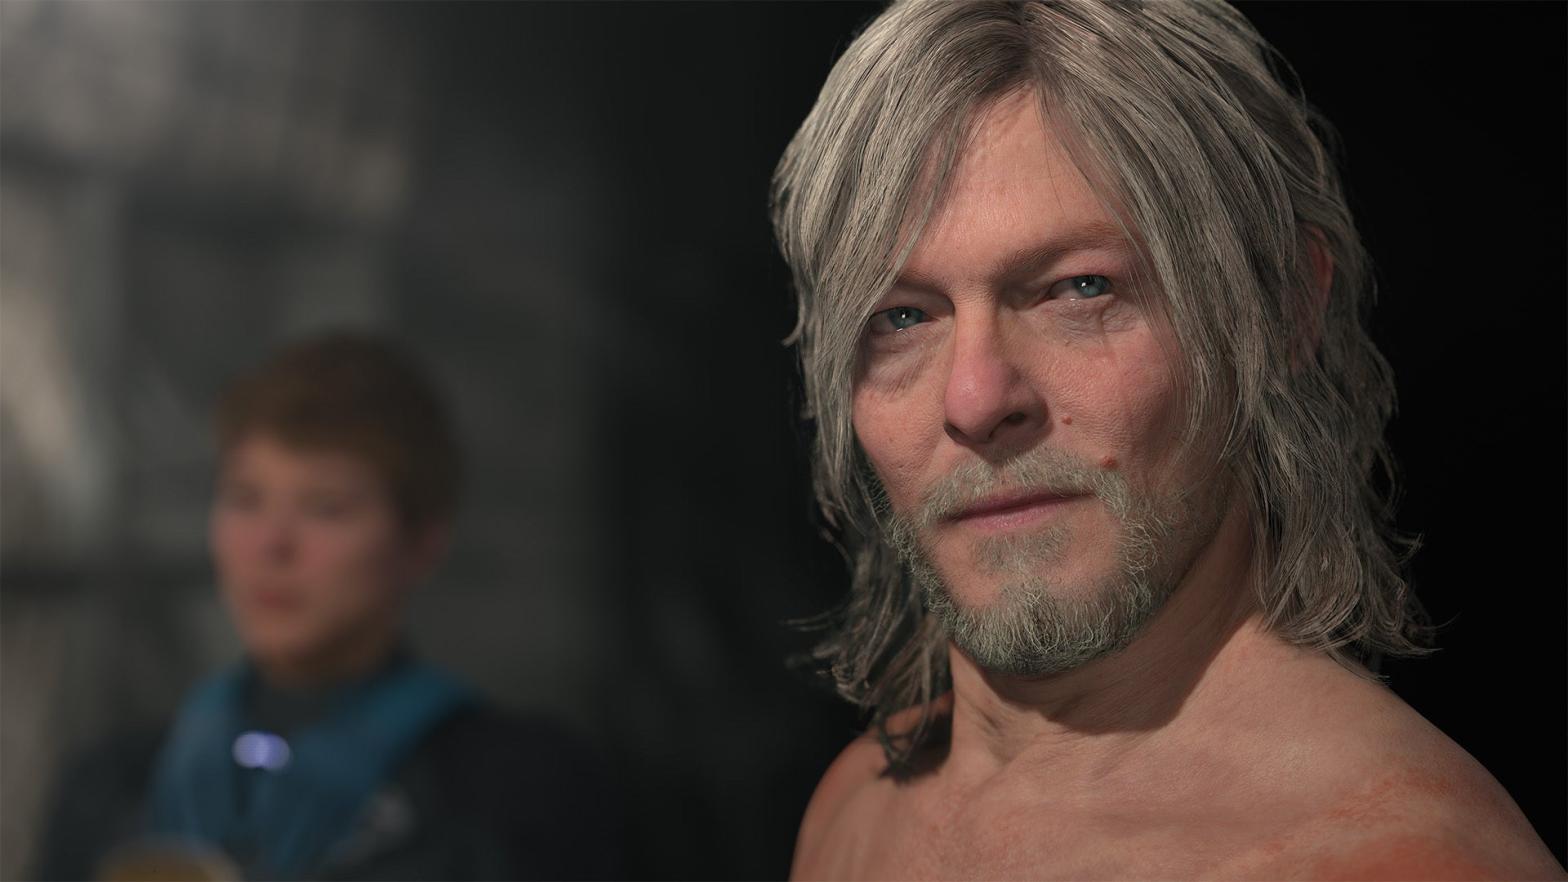 The Death Stranding movie won't be a retelling of the game you've already played. (Image: Kojima Productions)